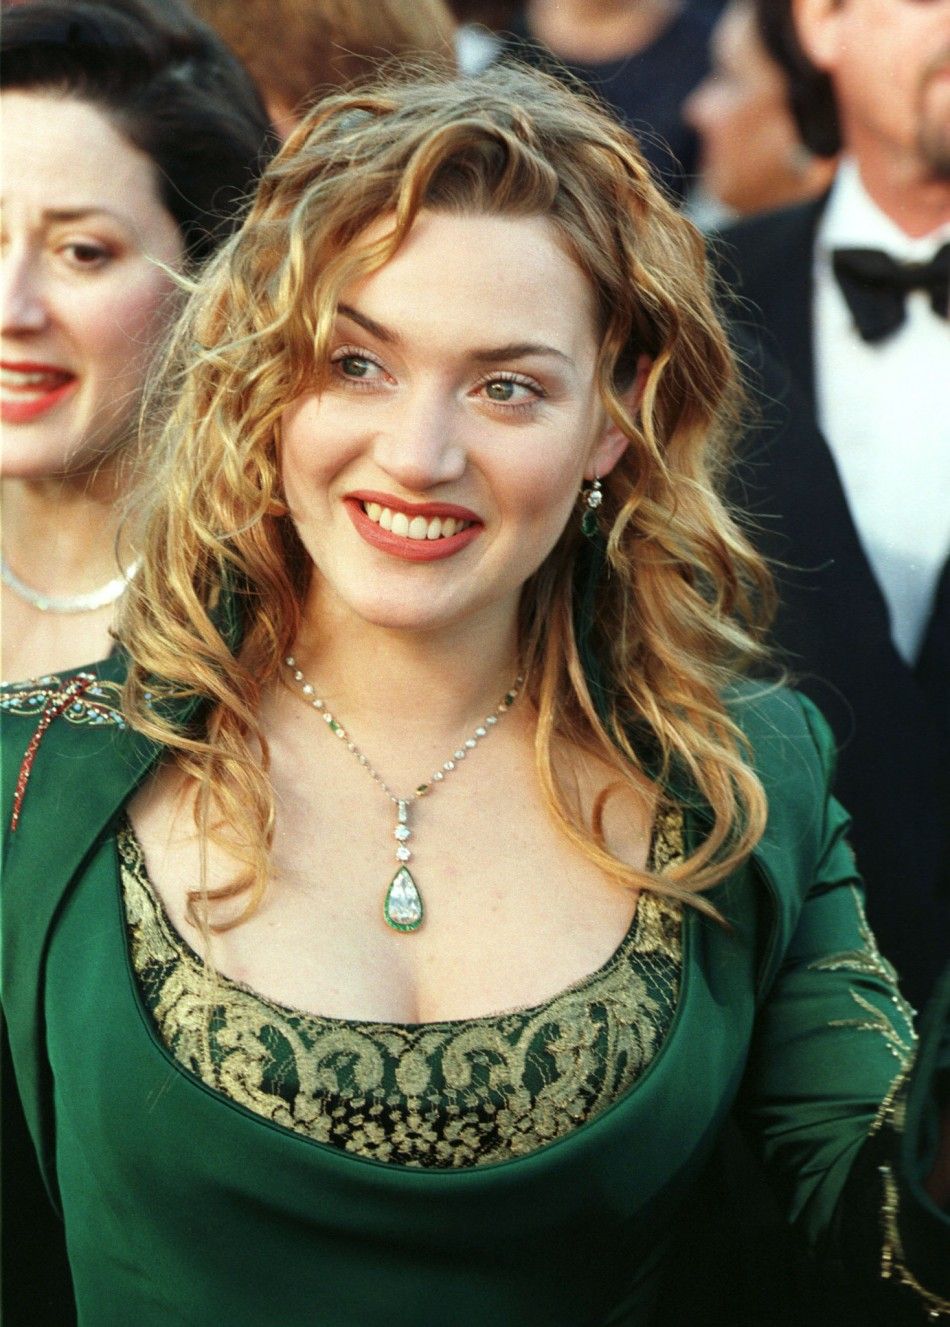 Kate Winslet on Leonardo DiCaprio Hes Fatter Now Is She Right 